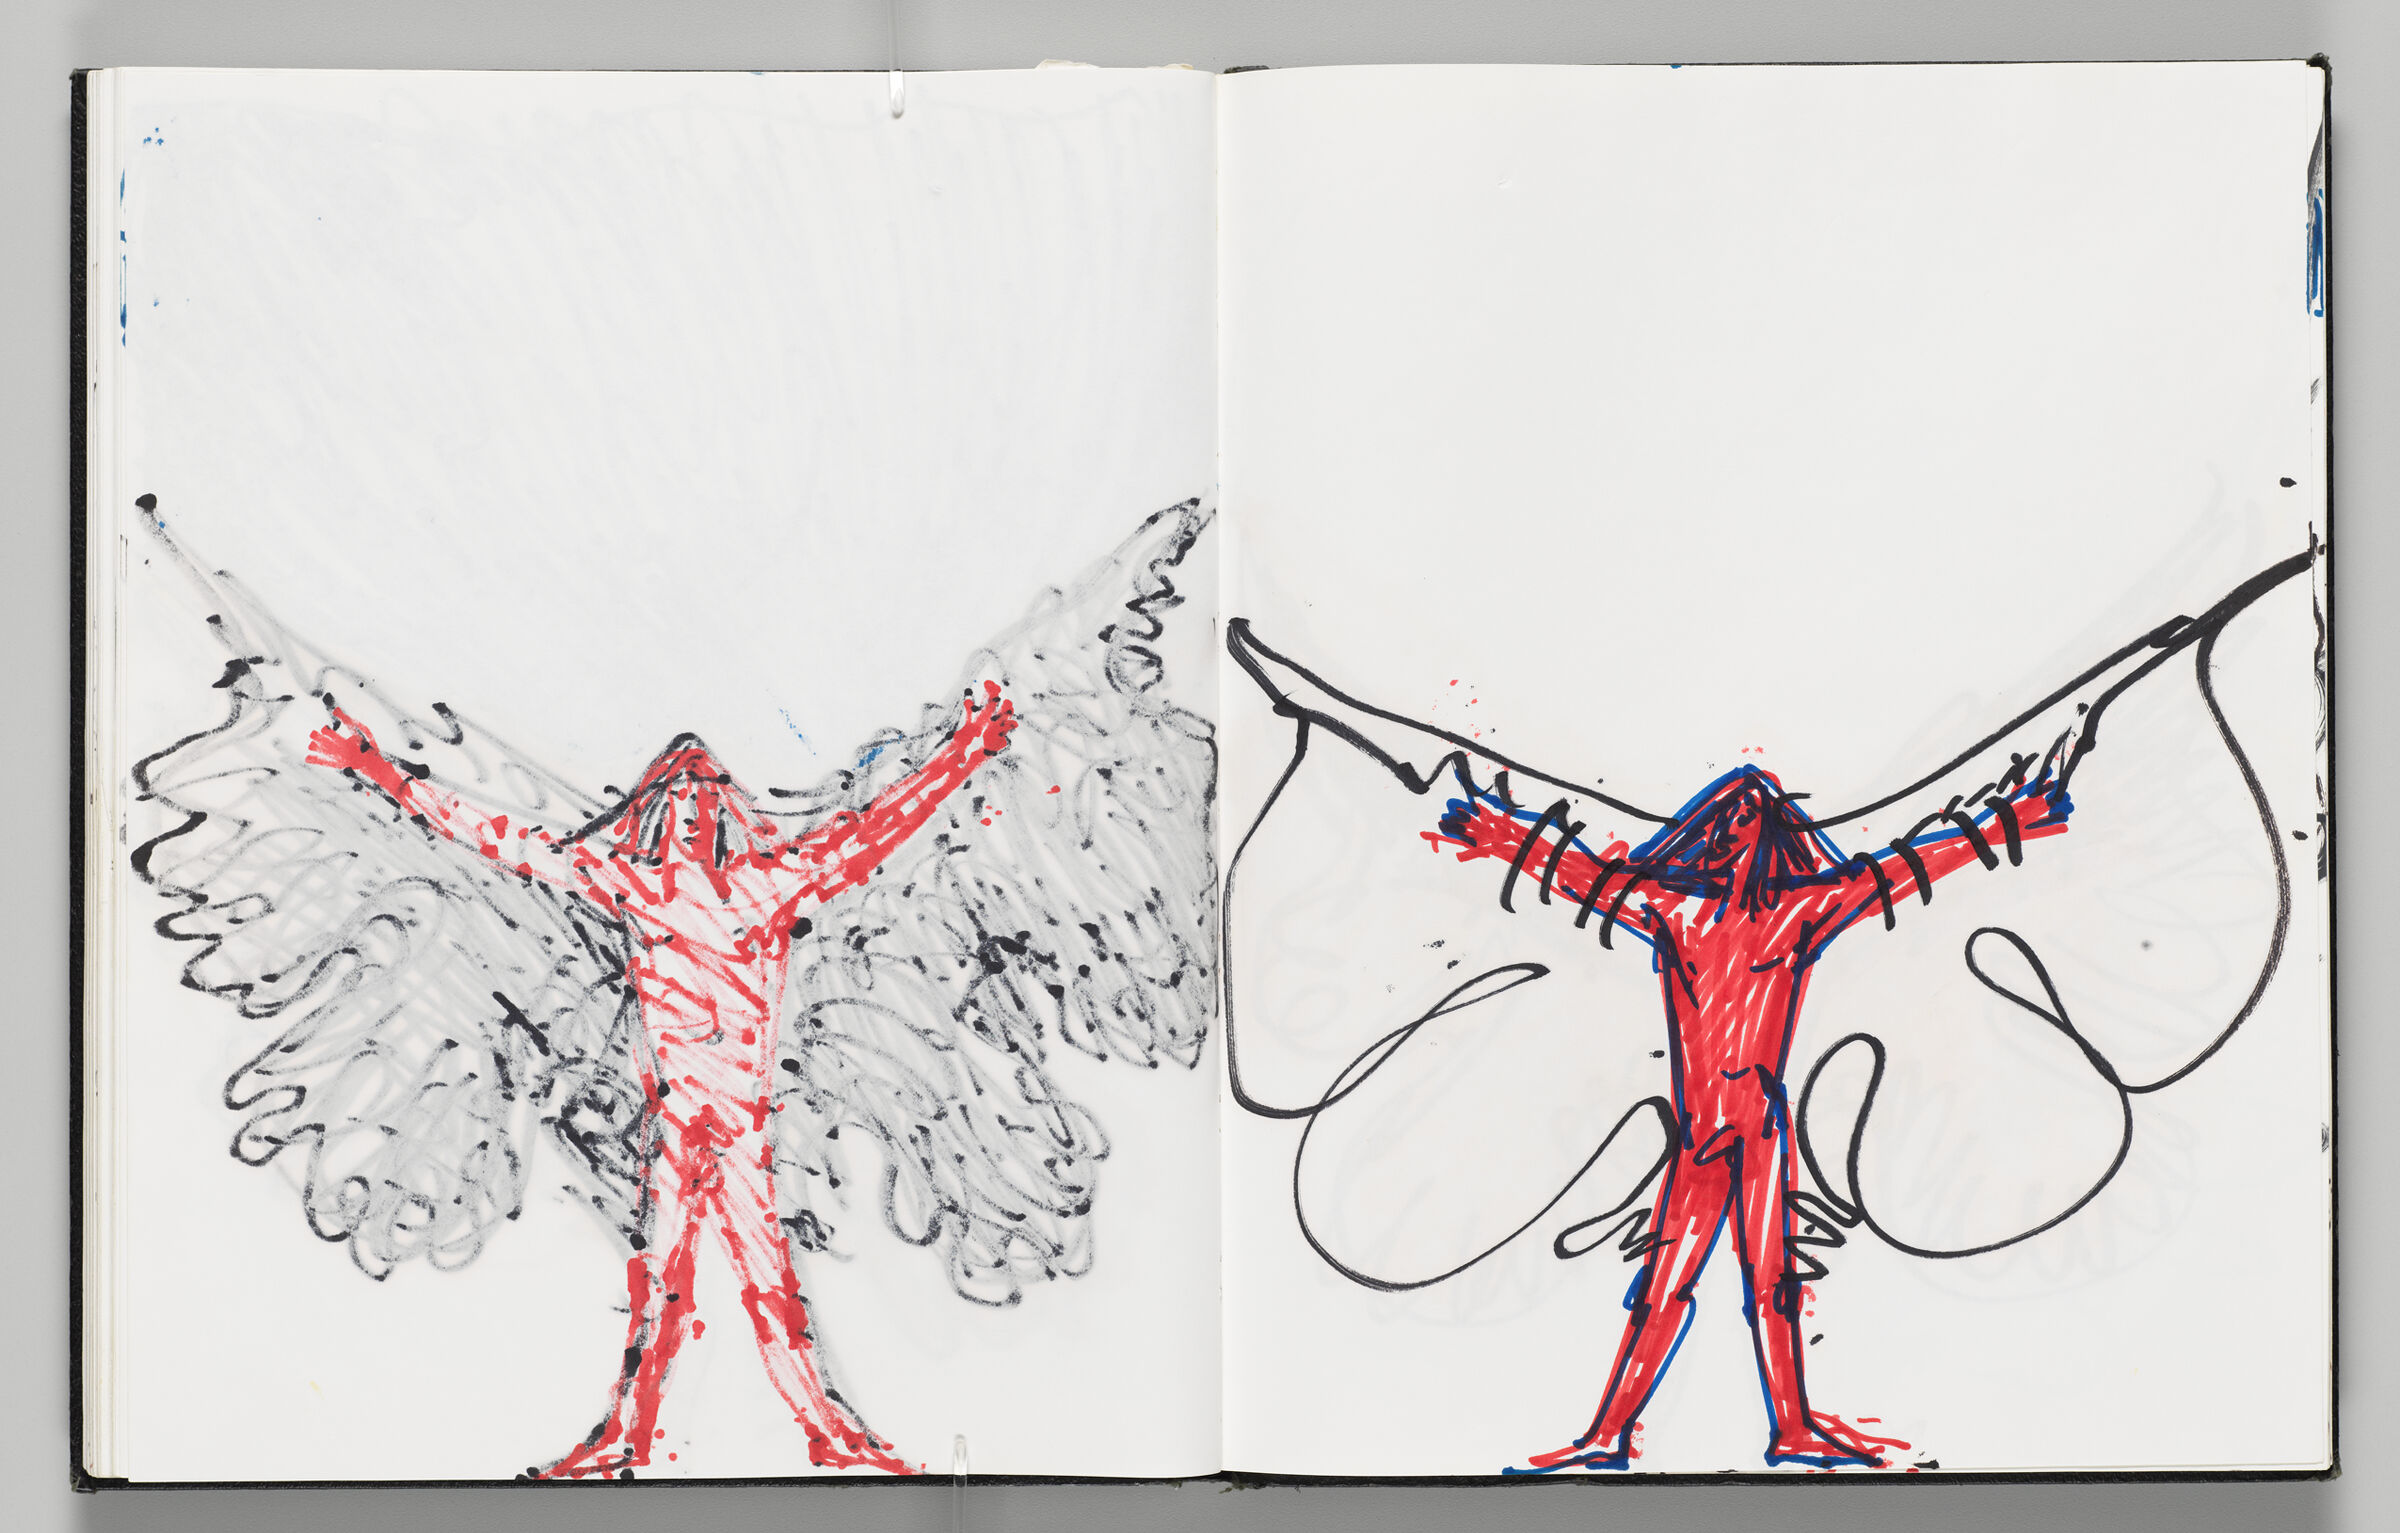 Untitled (Bleed-Through Of Previous Page, Left Page); Untitled (Sketch Of Icarus With Color Transfer, Right Page)